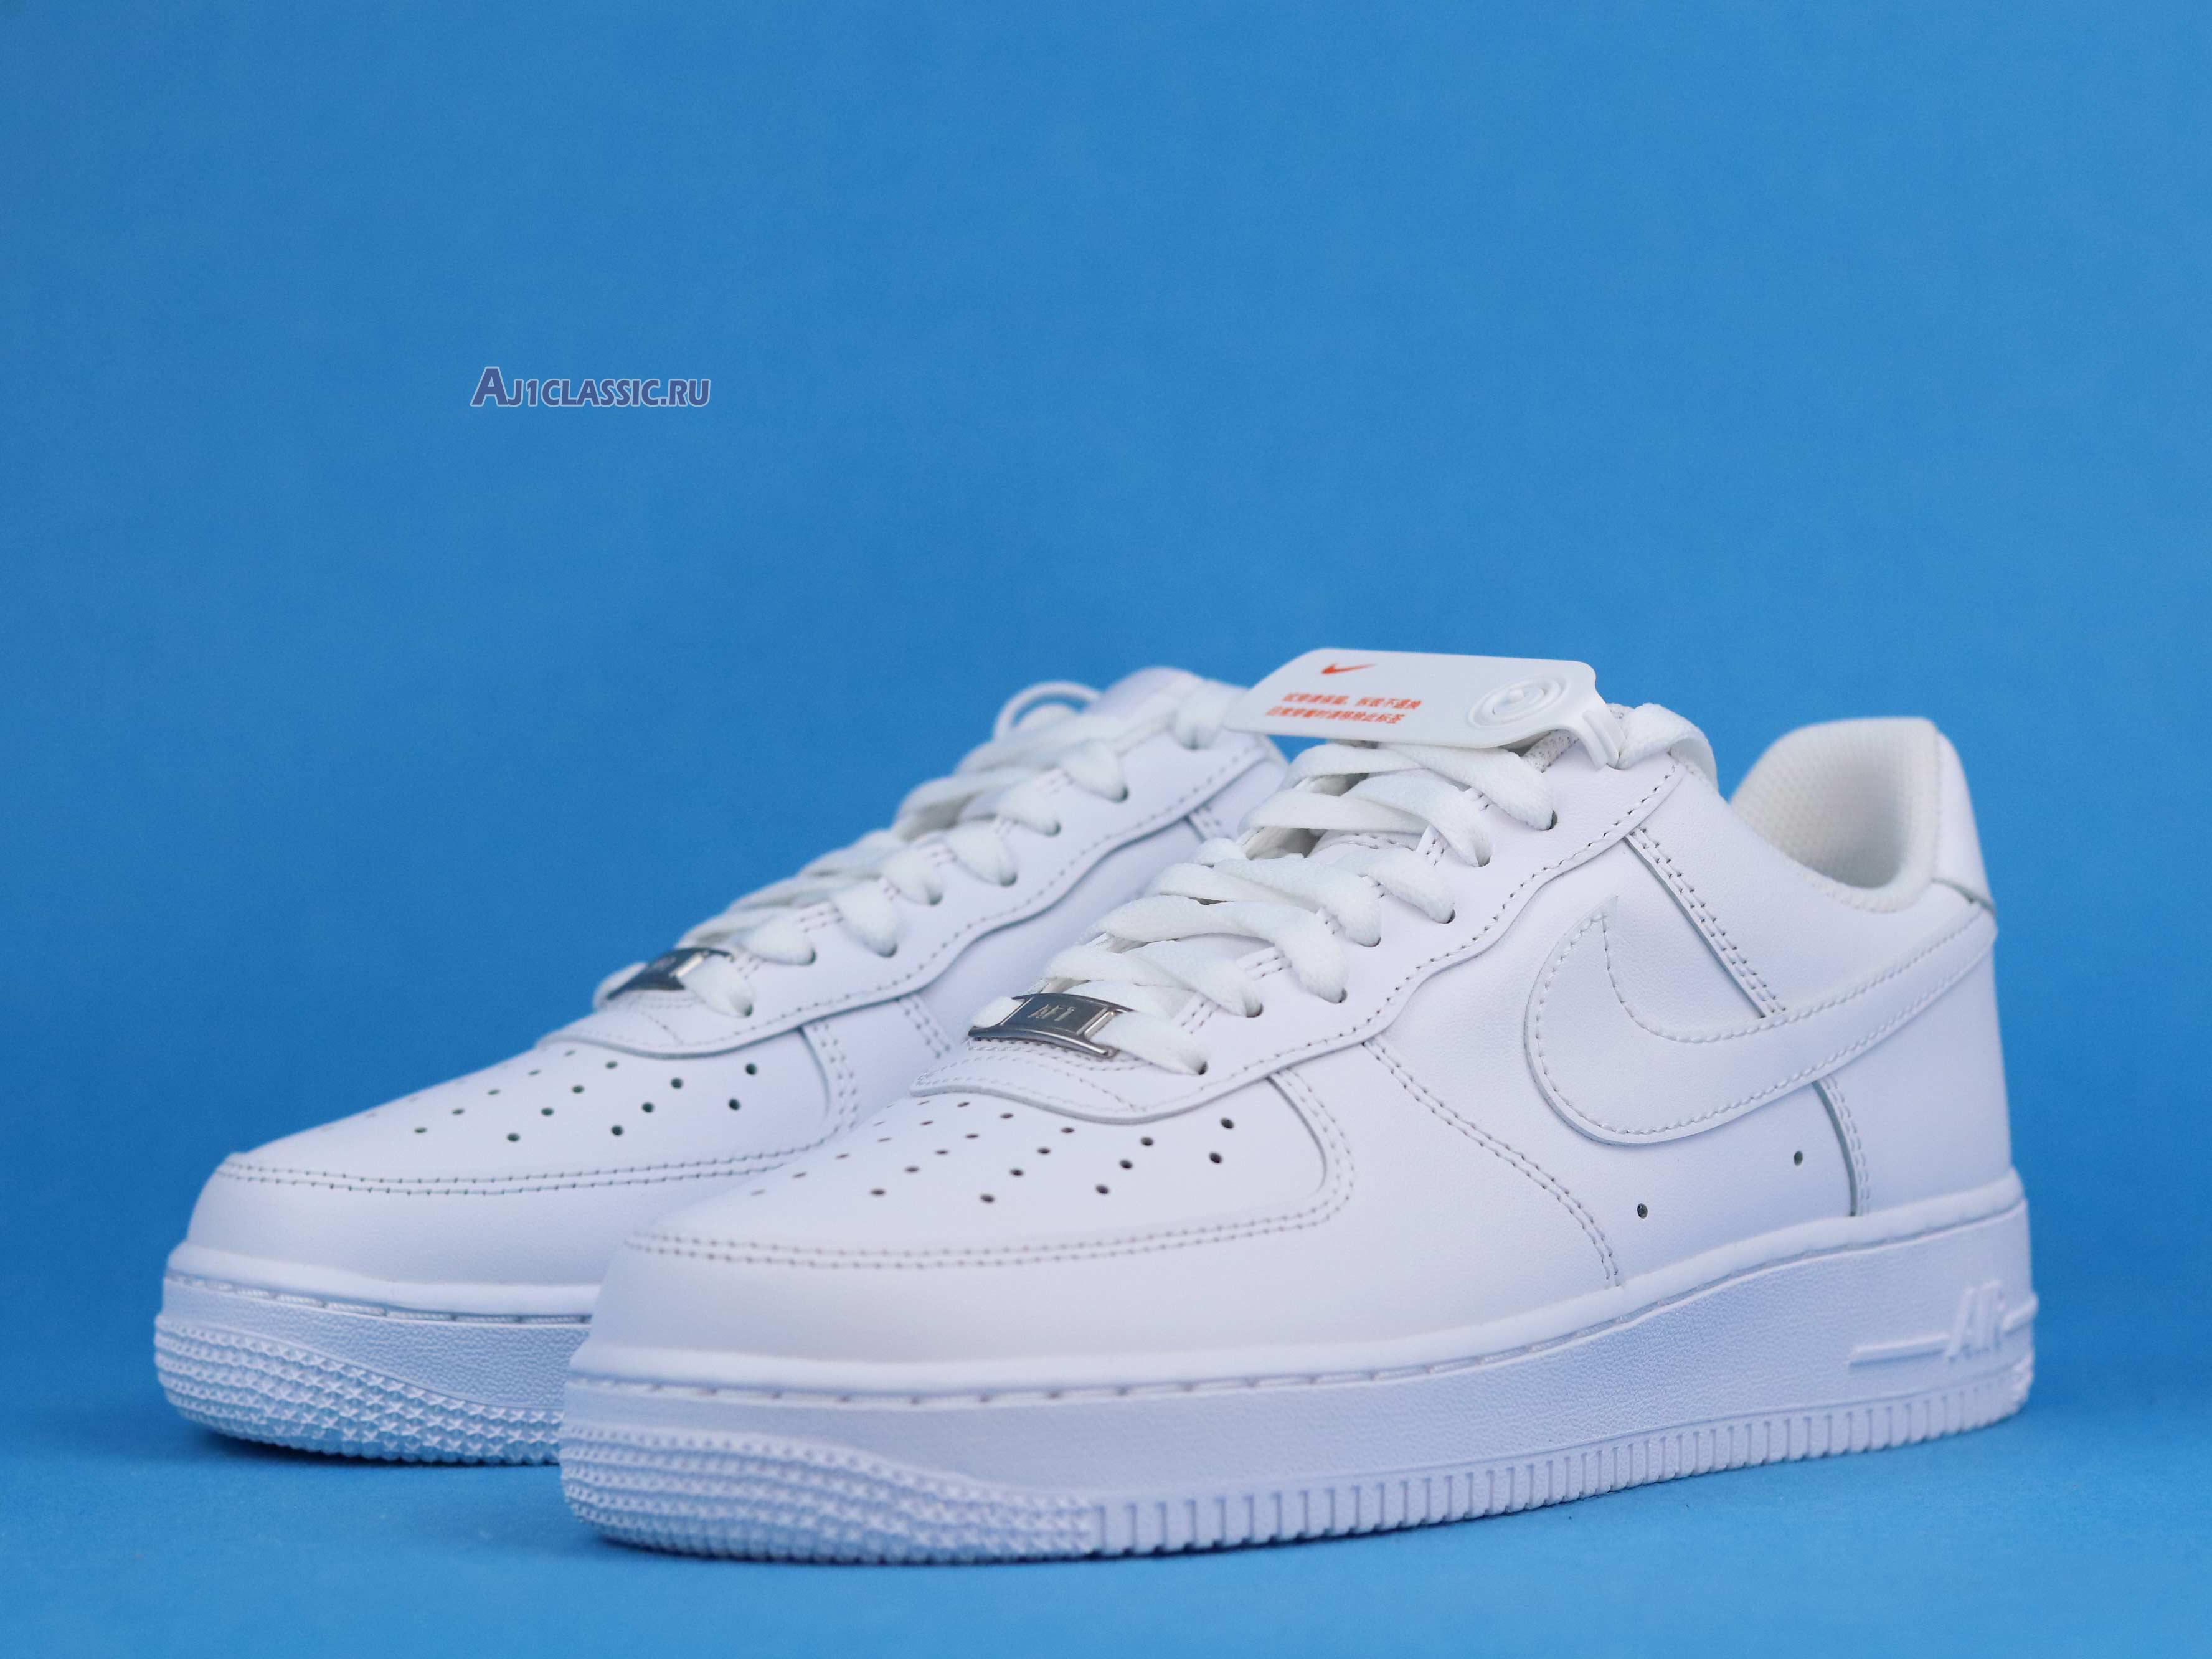 Nike Air Force 1 Low 07 "White" 315122-111